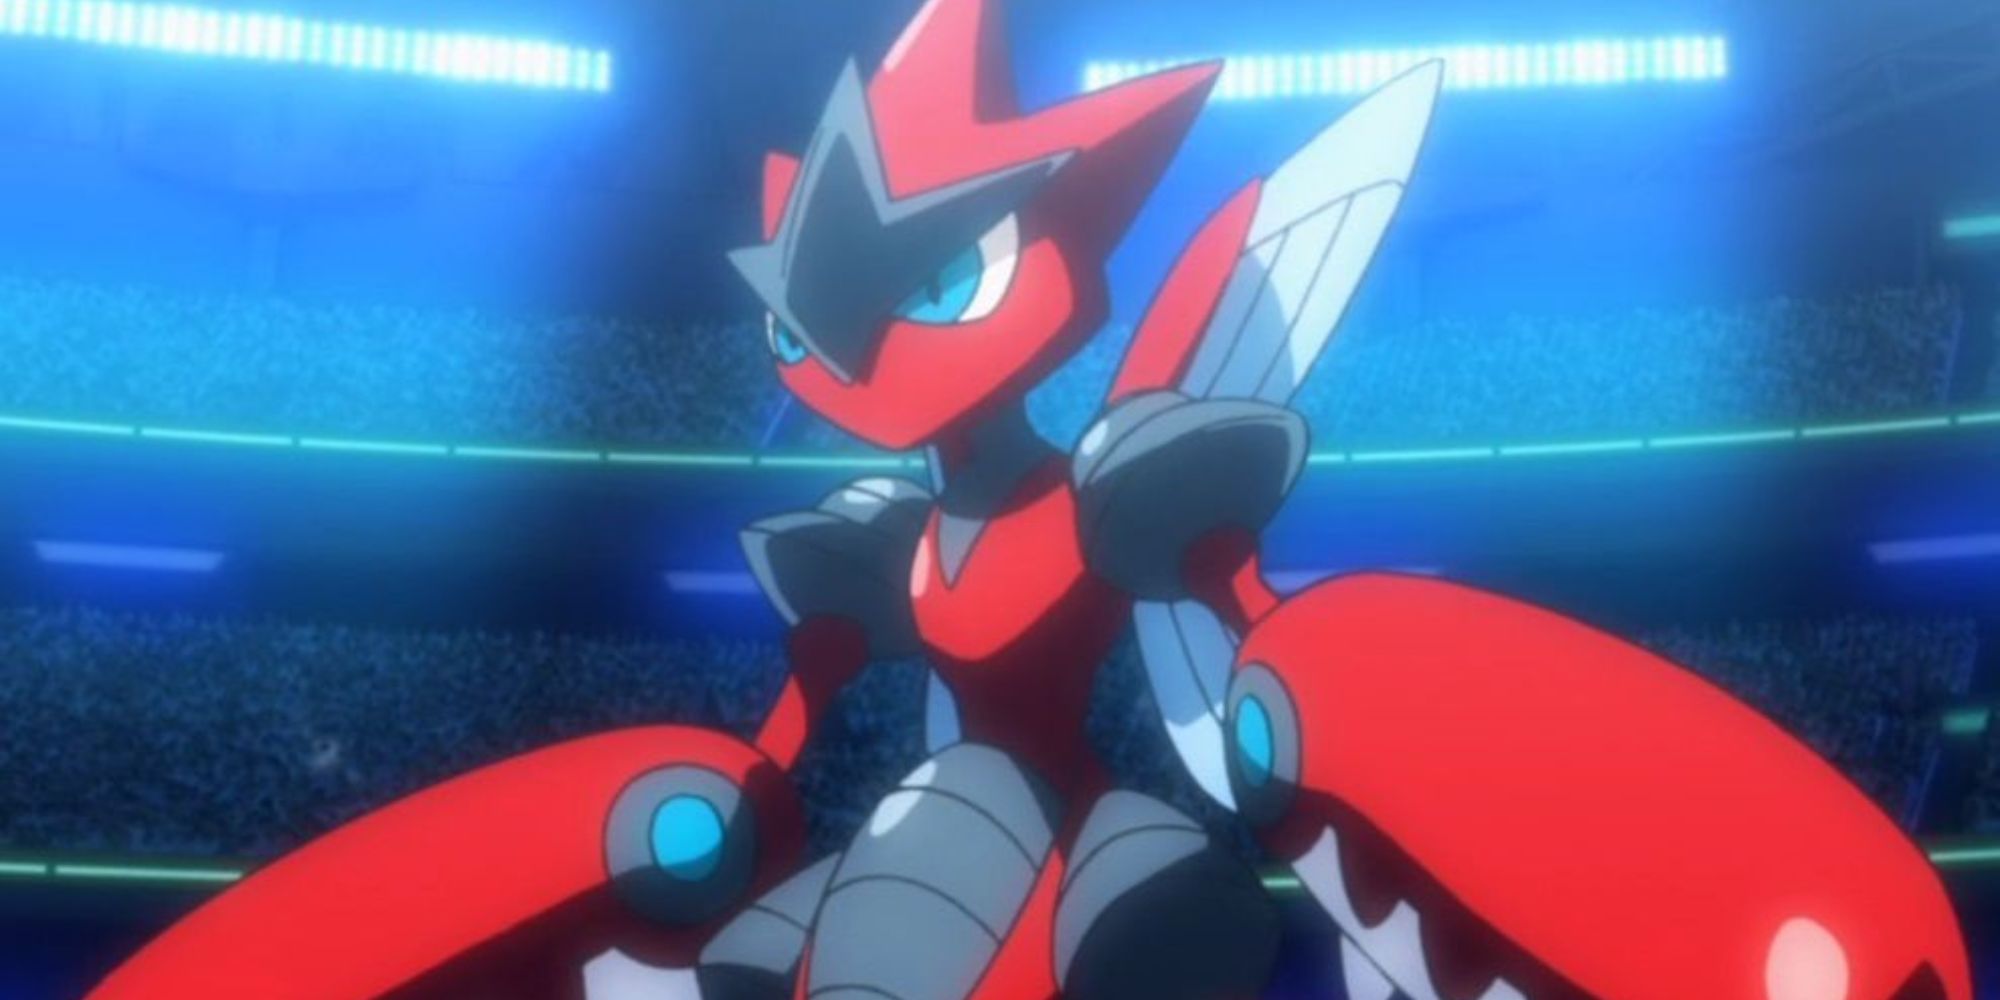 Mega Scizor stands in a packed stadium before a battle in the Pokemon anime.